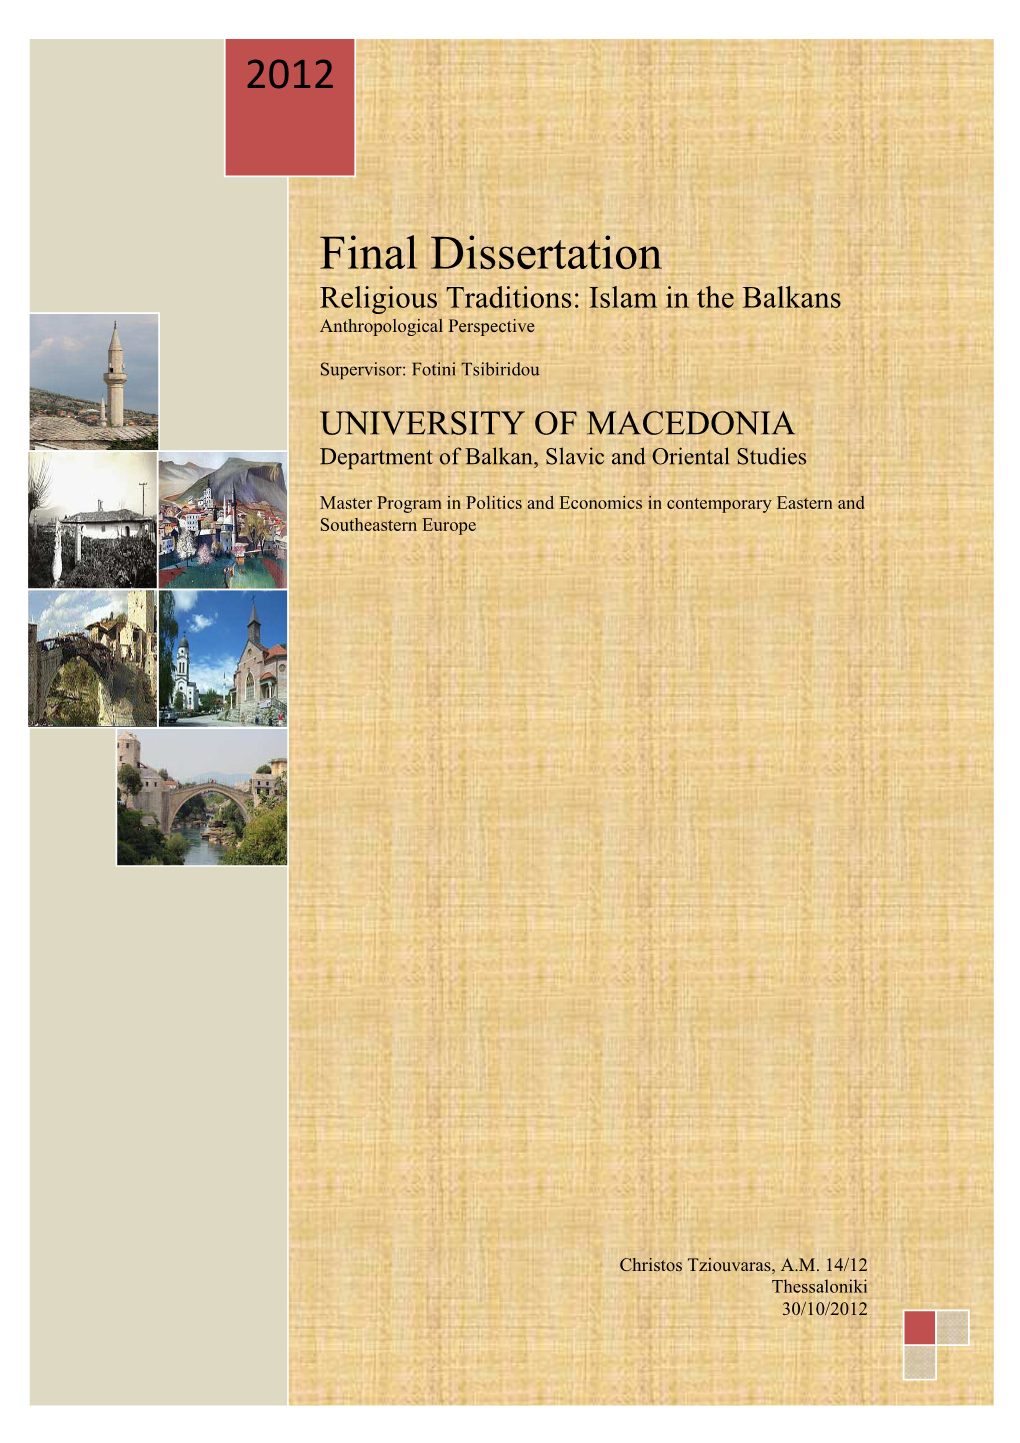 Final Dissertation Religious Traditions: Islam in the Balkans Anthropological Perspective